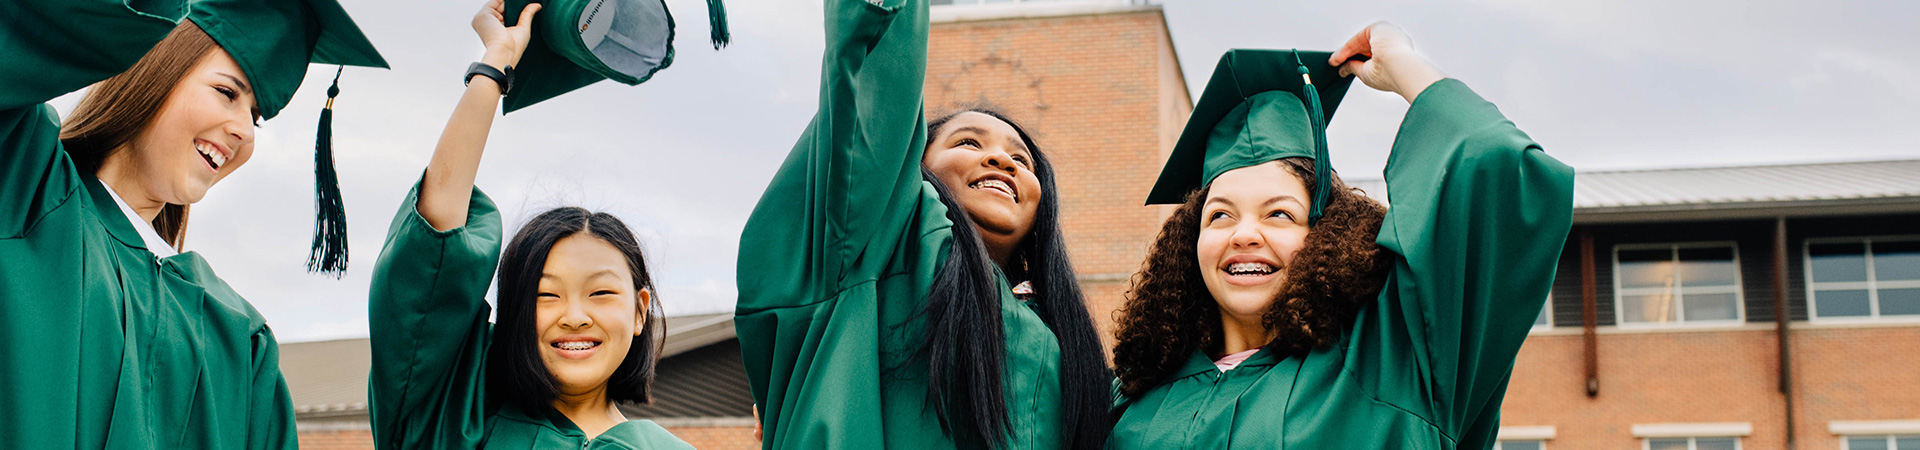  A group of teen girls wearing green graduation robes and tossing their caps in the air 